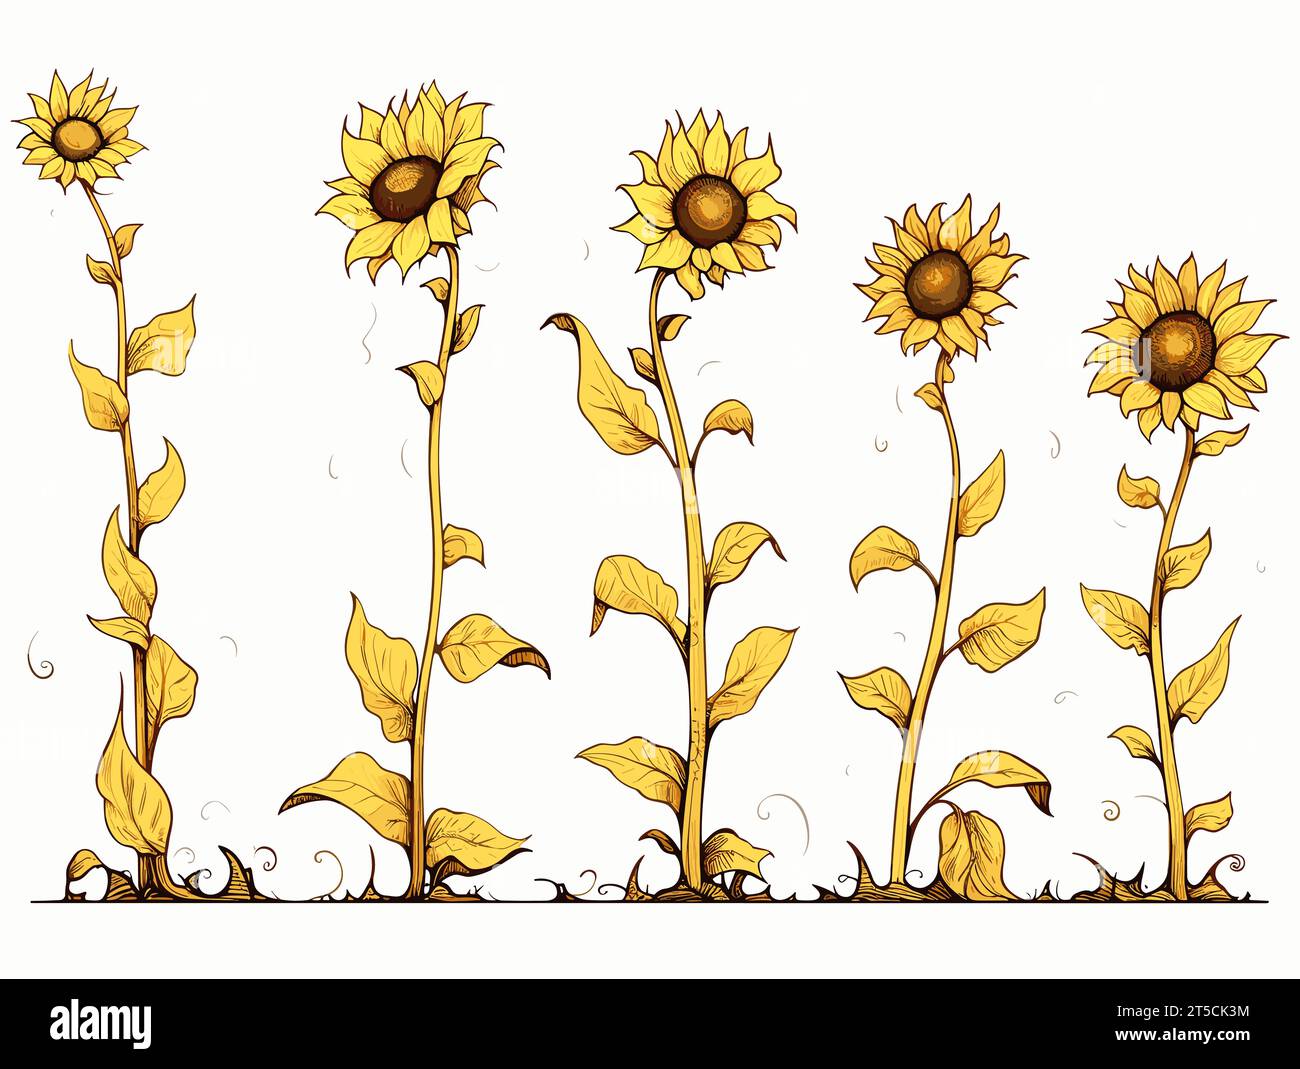 Drawing of Sunflowers - stages of growth illustration separated, sweeping overdrawn lines. Stock Vector